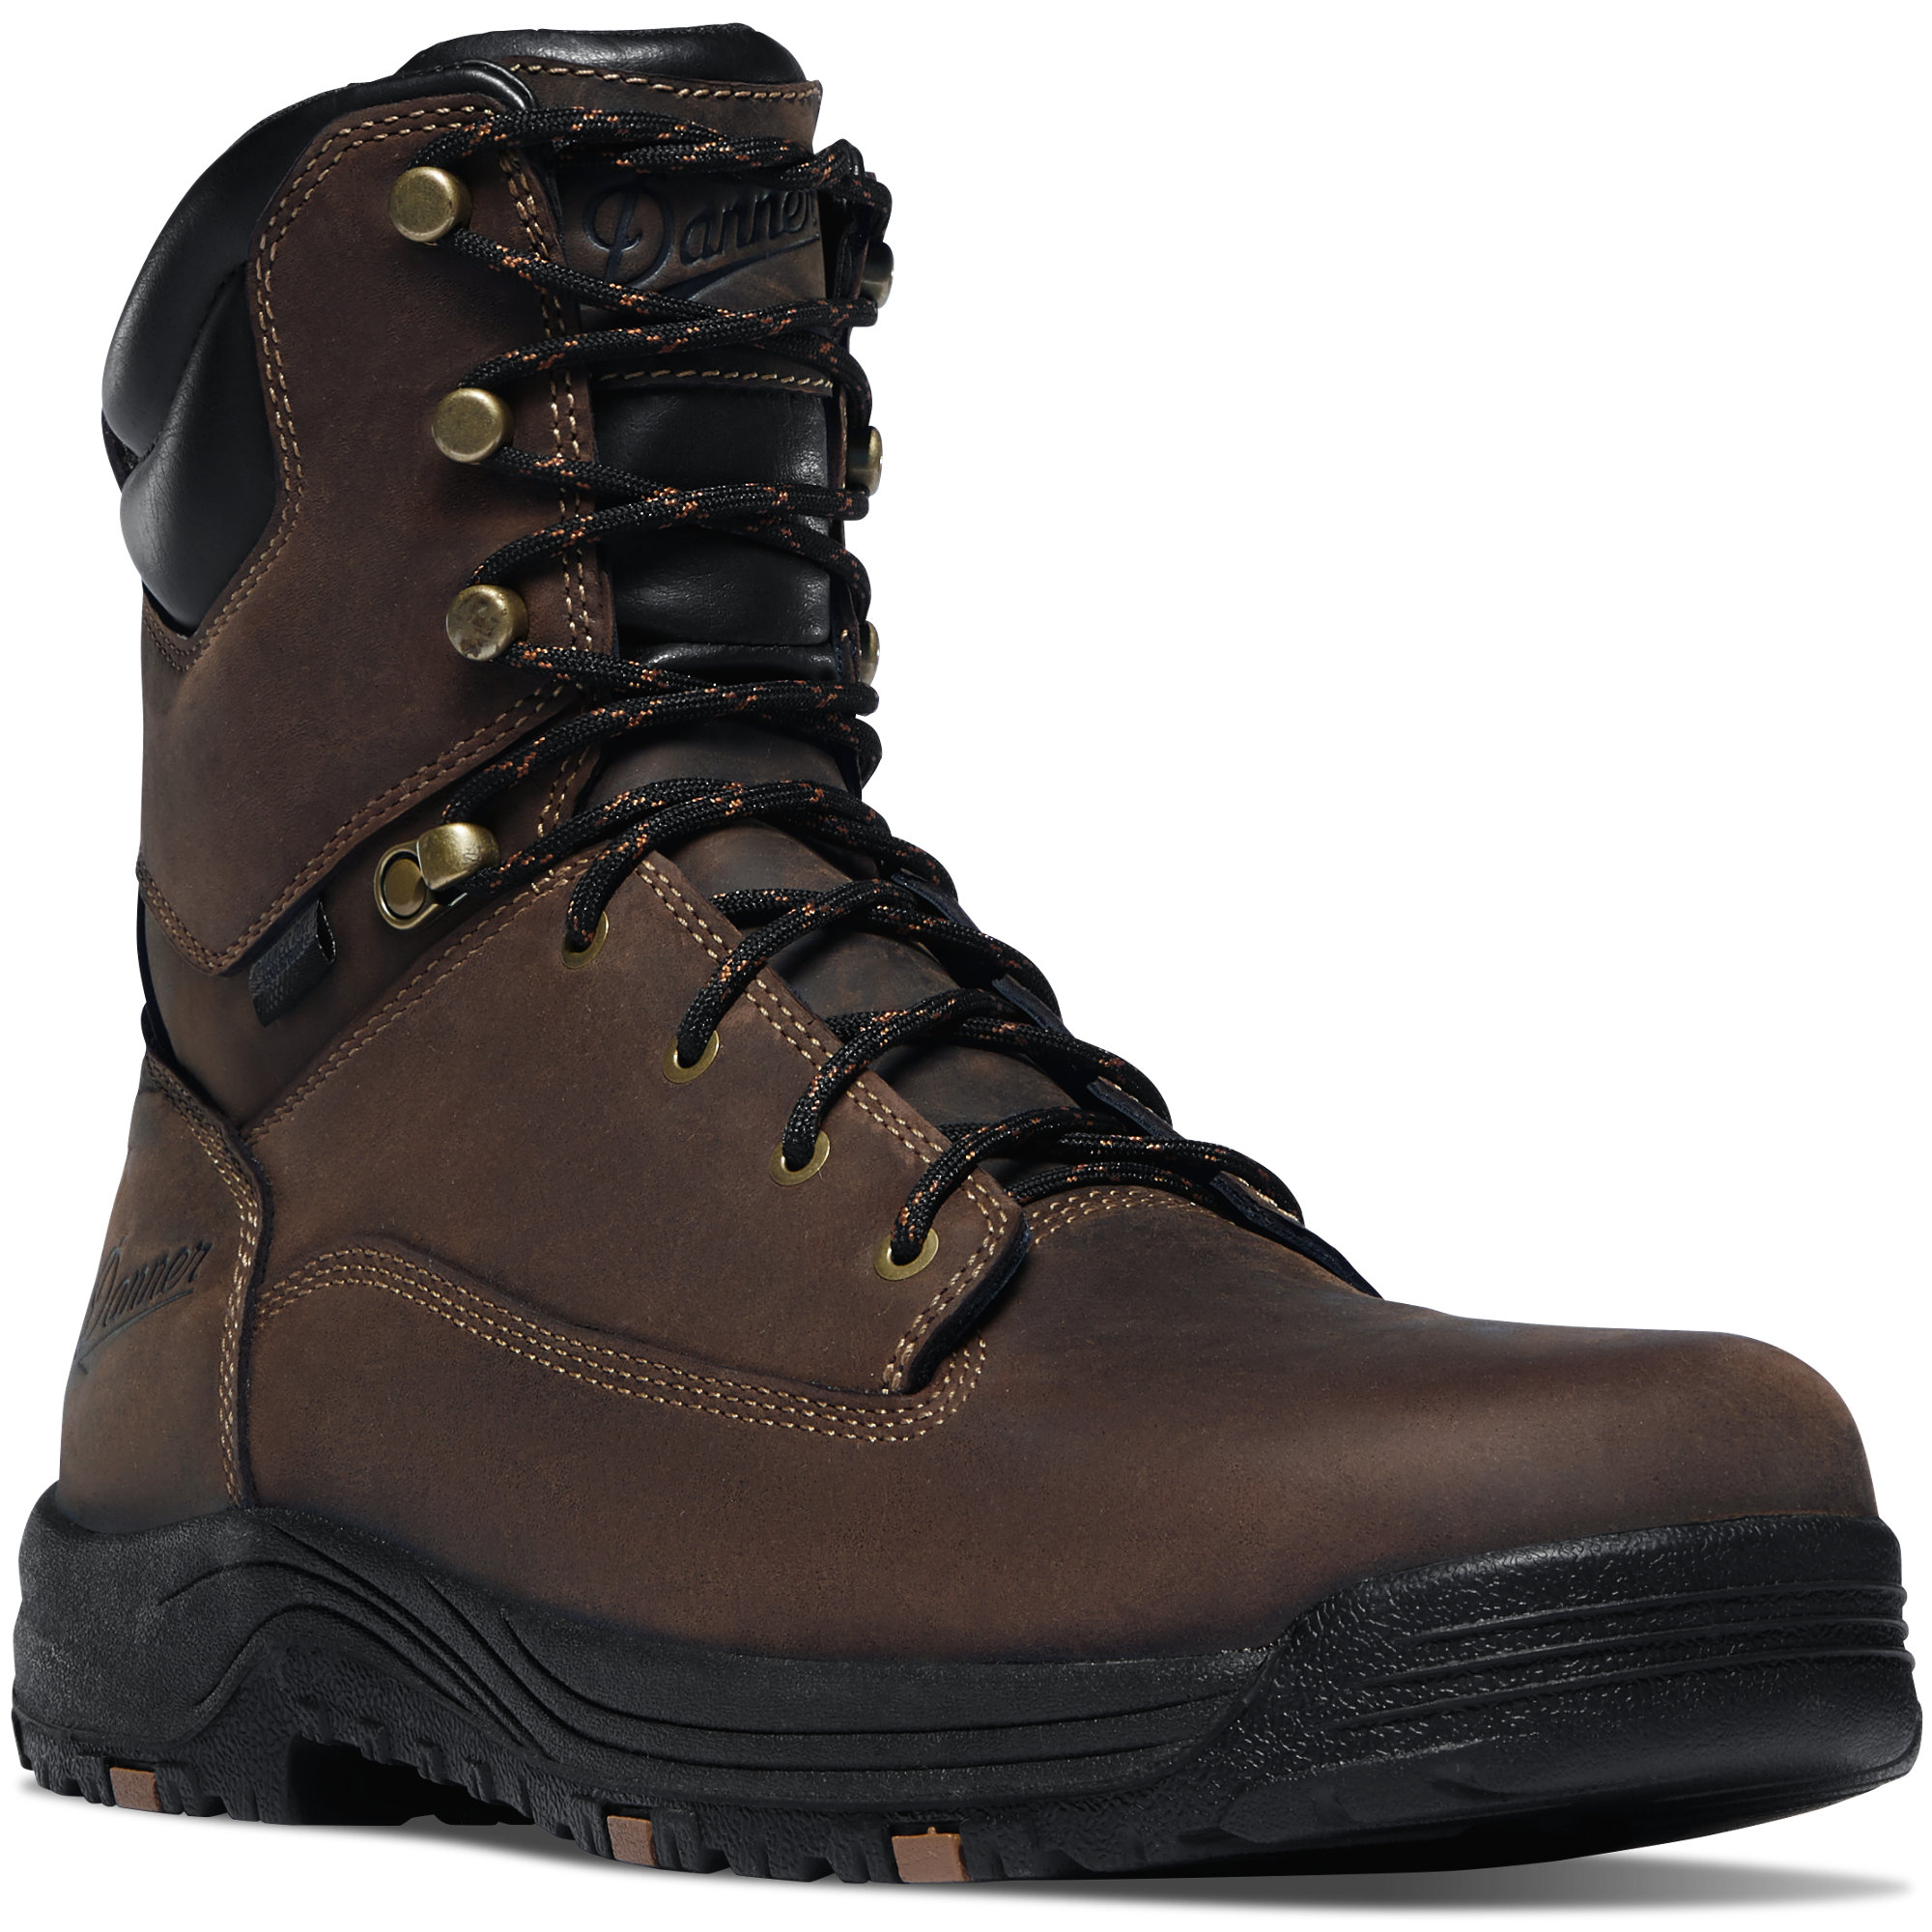 Danner Men's 8-Inch Caliper Aluminum Toe Boots from Columbia Safety